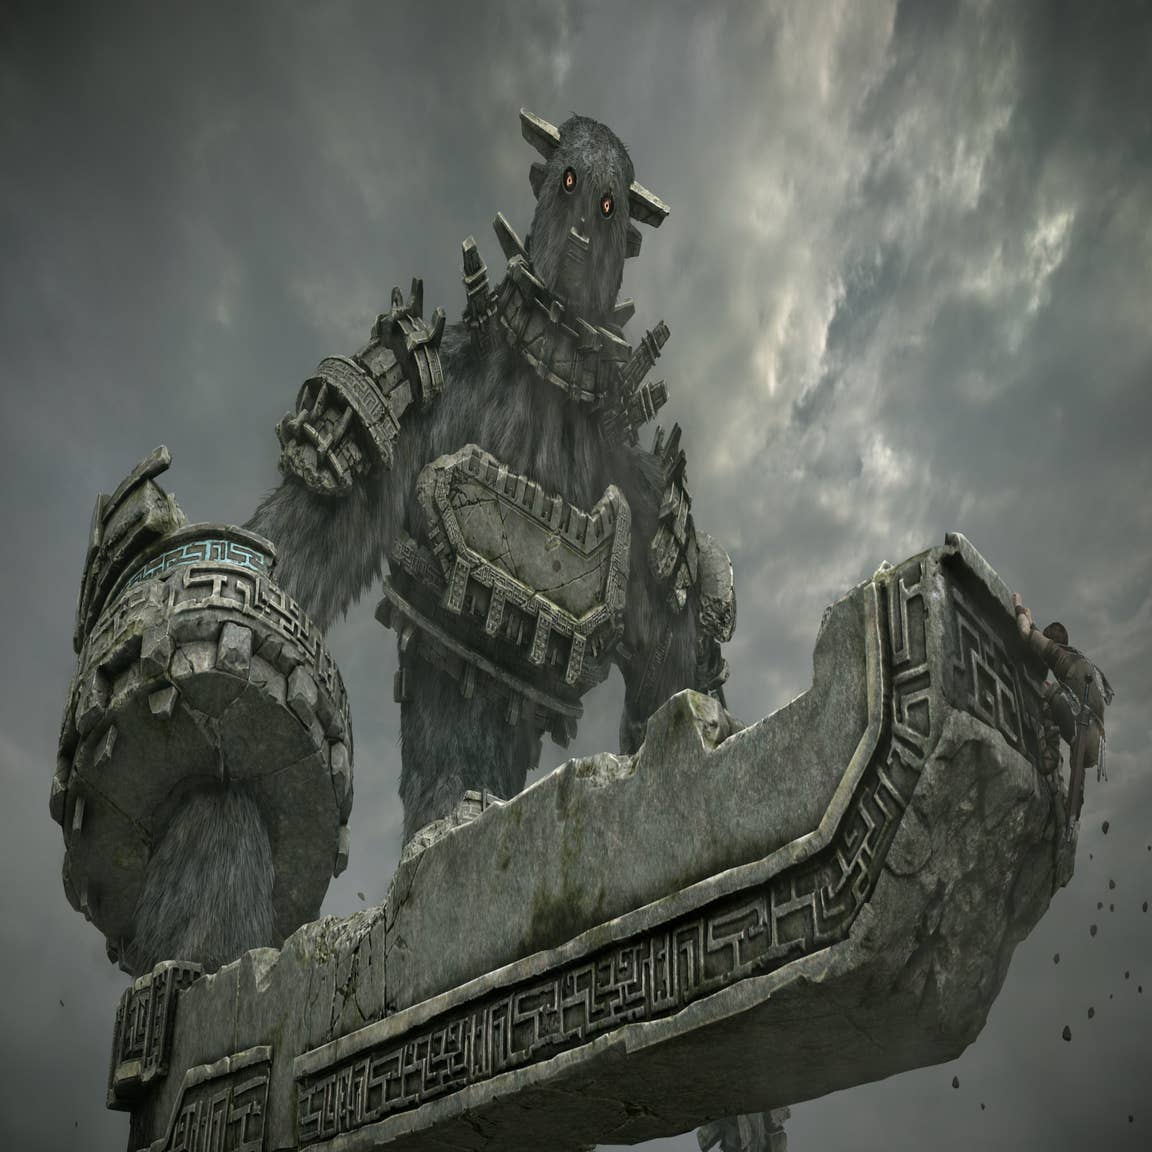 SHADOW OF THE COLOSSUS – Story Trailer